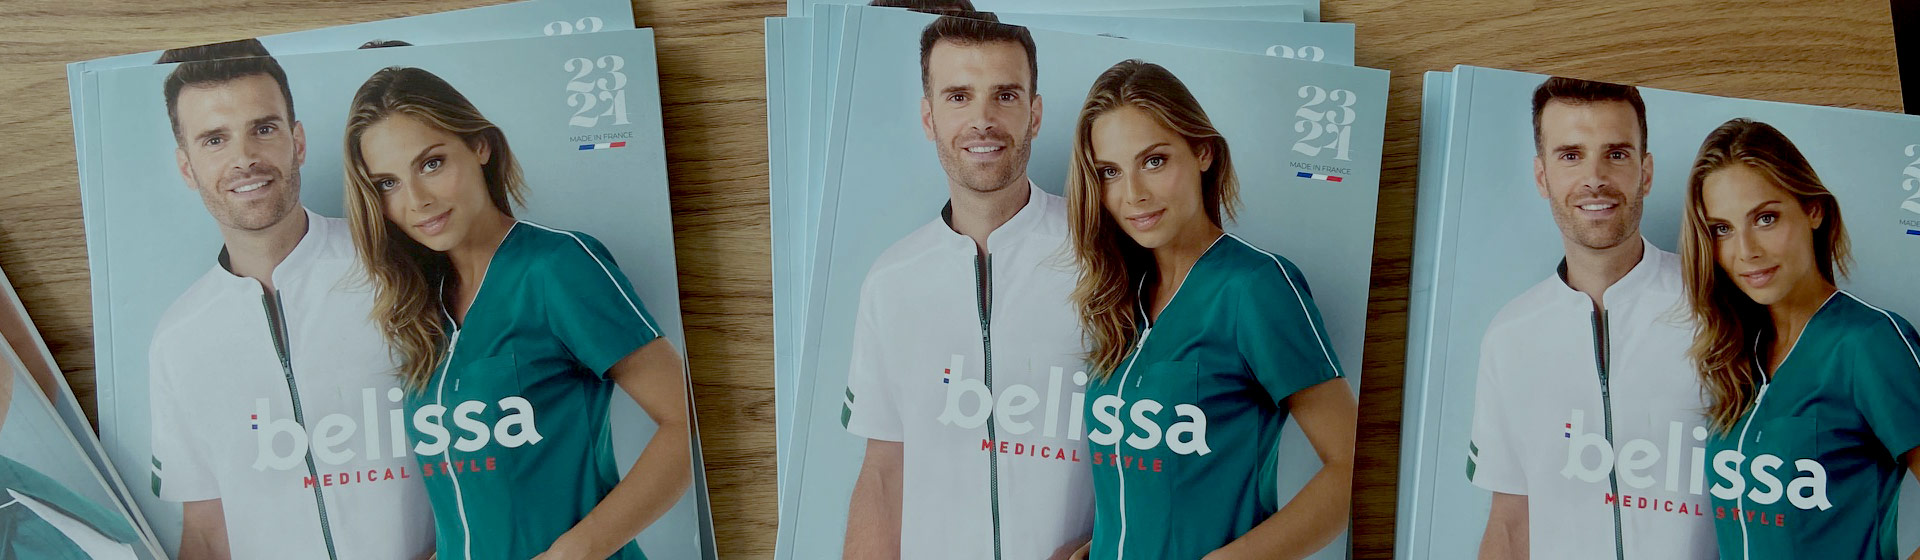 Catalogue tenues médicales Made in France Belissa